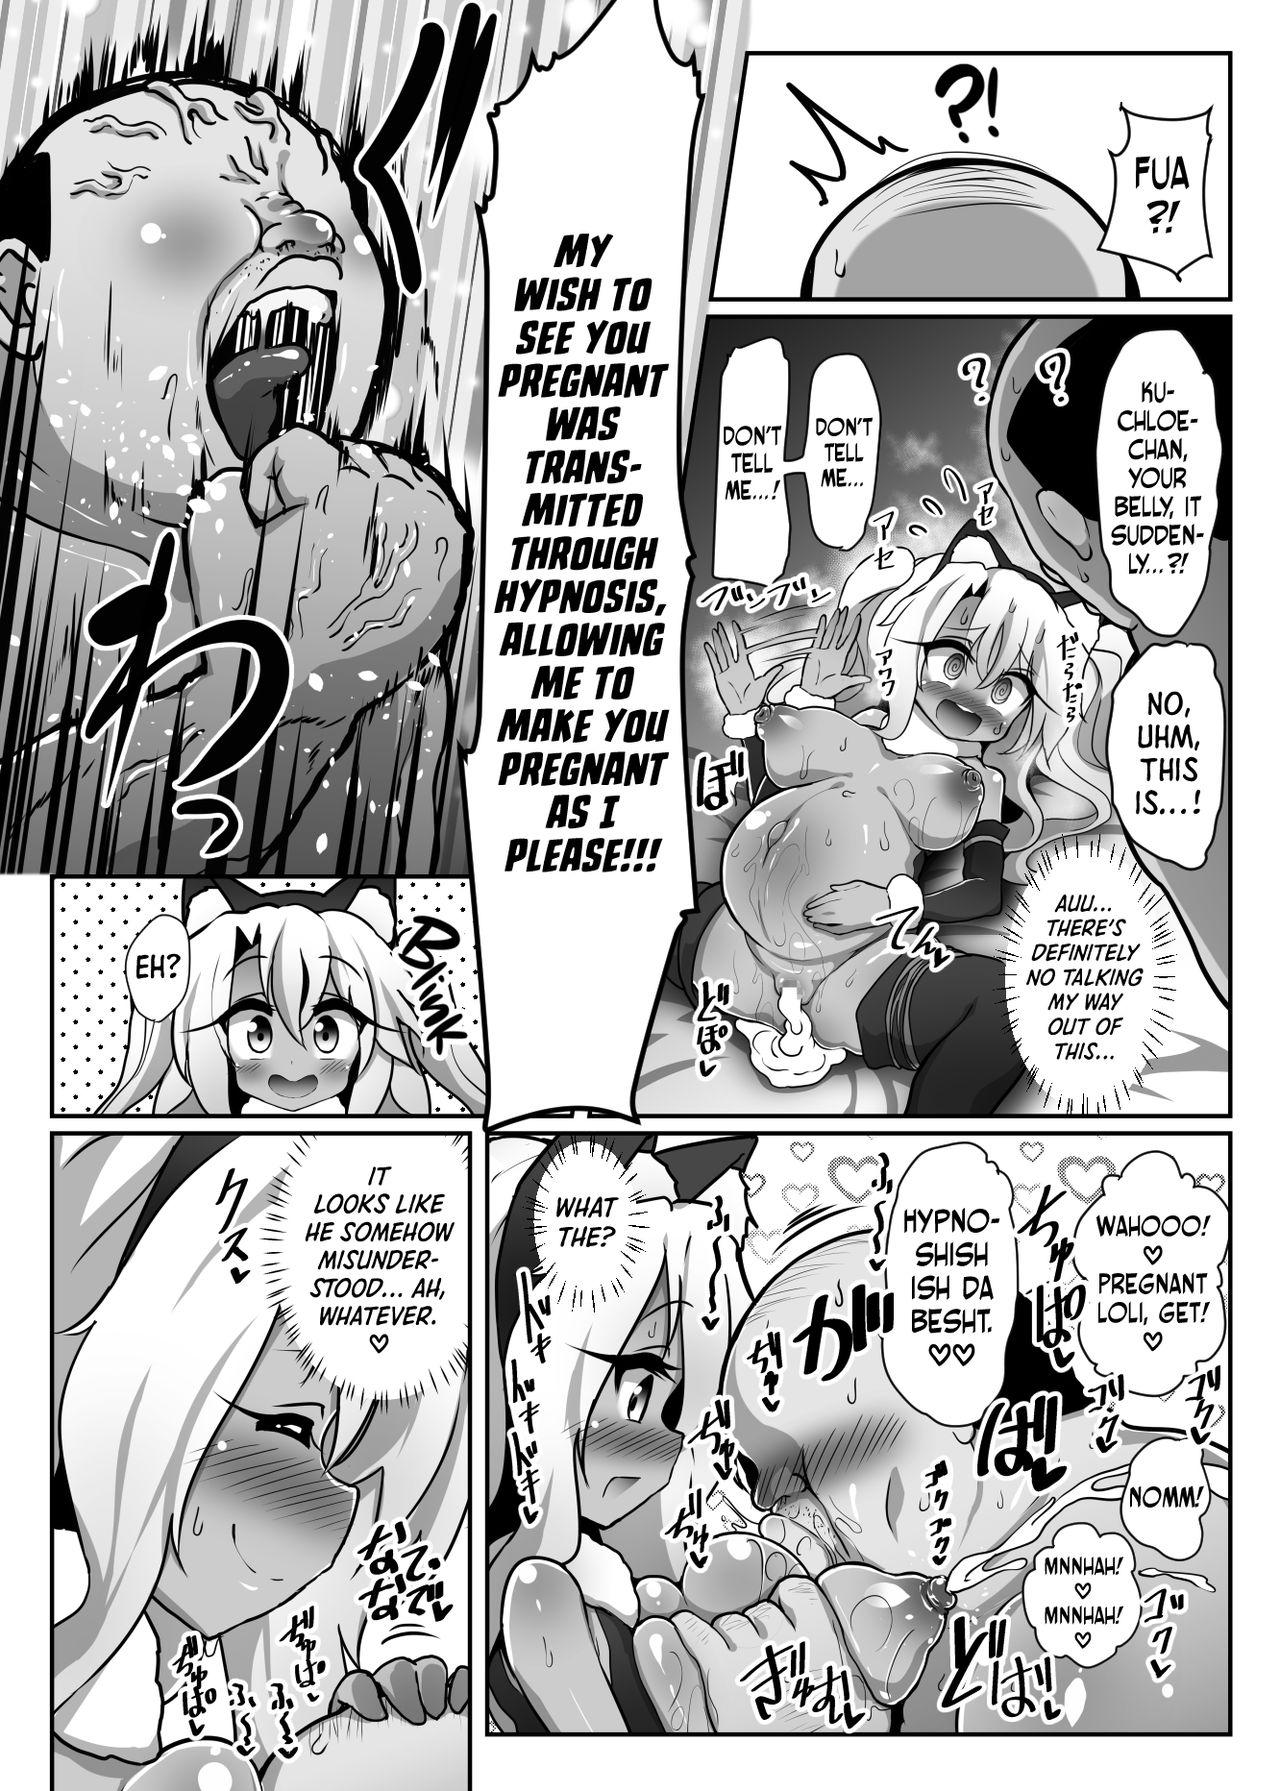 [Kotee] A book where Chloe-chan pretends to be hypnotized and relentlessly gives birth over and over to a disgusting old micro-dicked virgin’s babies. (Fate/kaleid liner Prisma Illya) [English] [Secluded] [Digital] 30